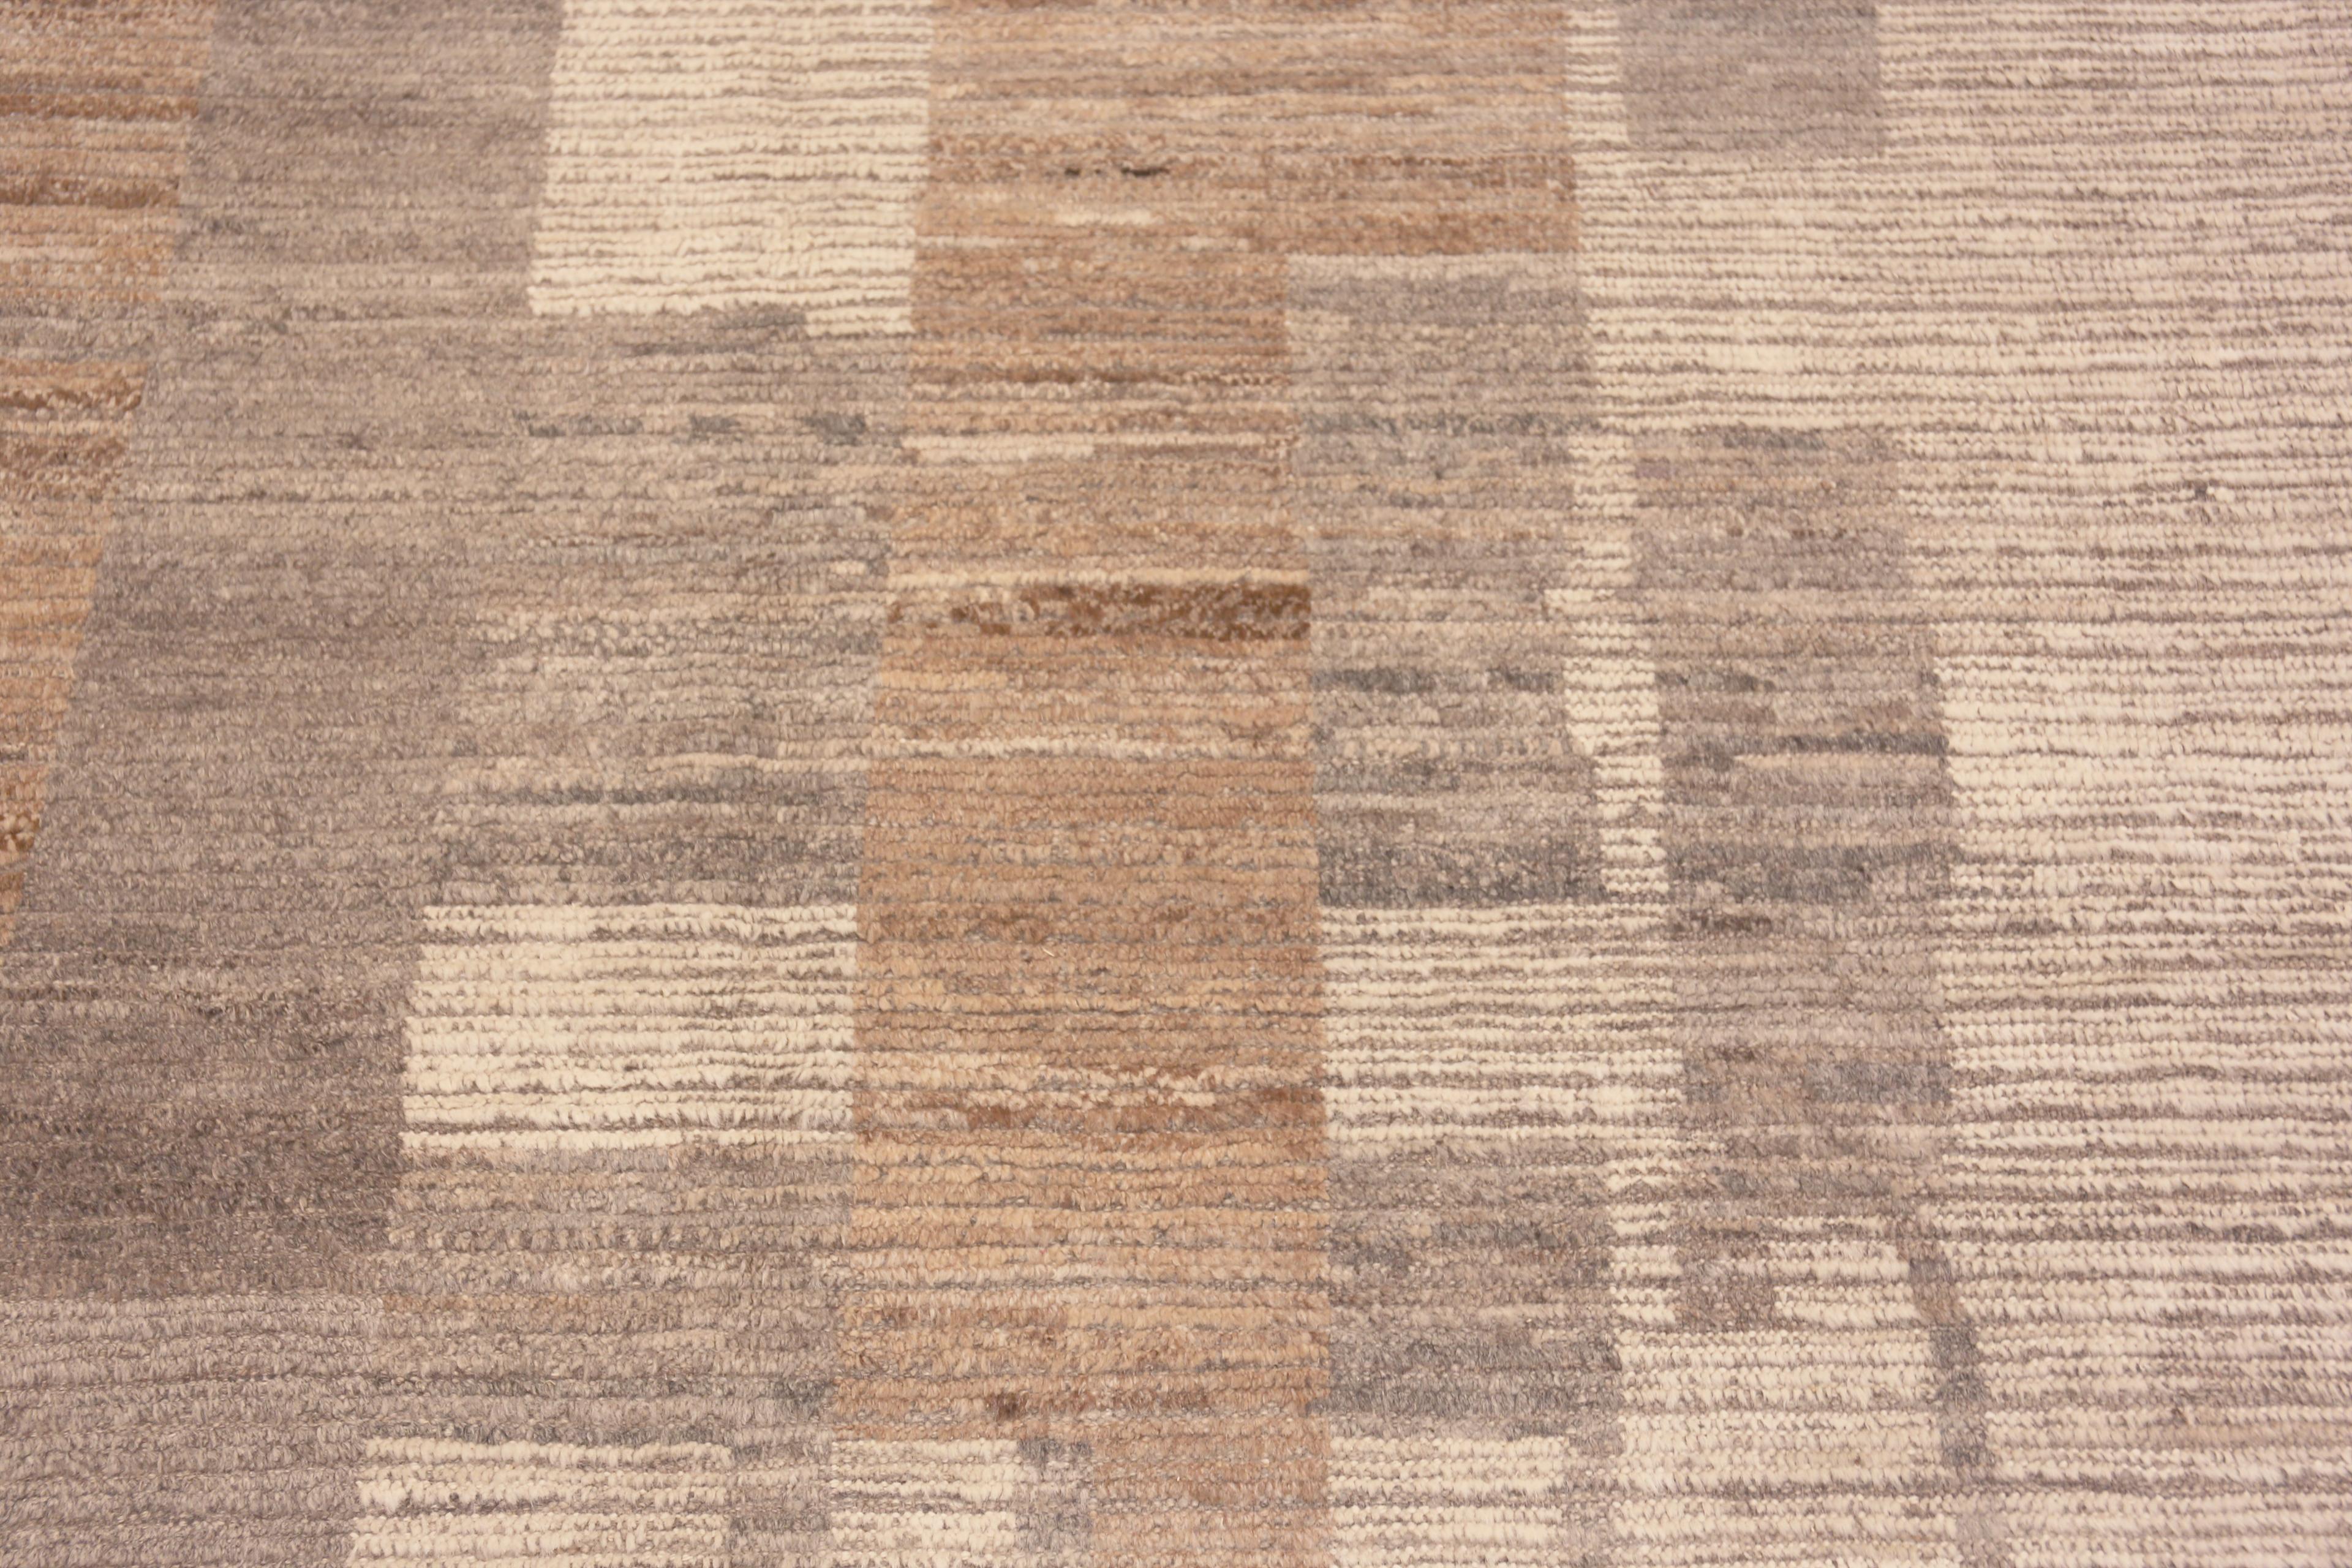 Wool Nazmiyal Collection Brown and Beige Modern Abstract Decorative Rug 14'2